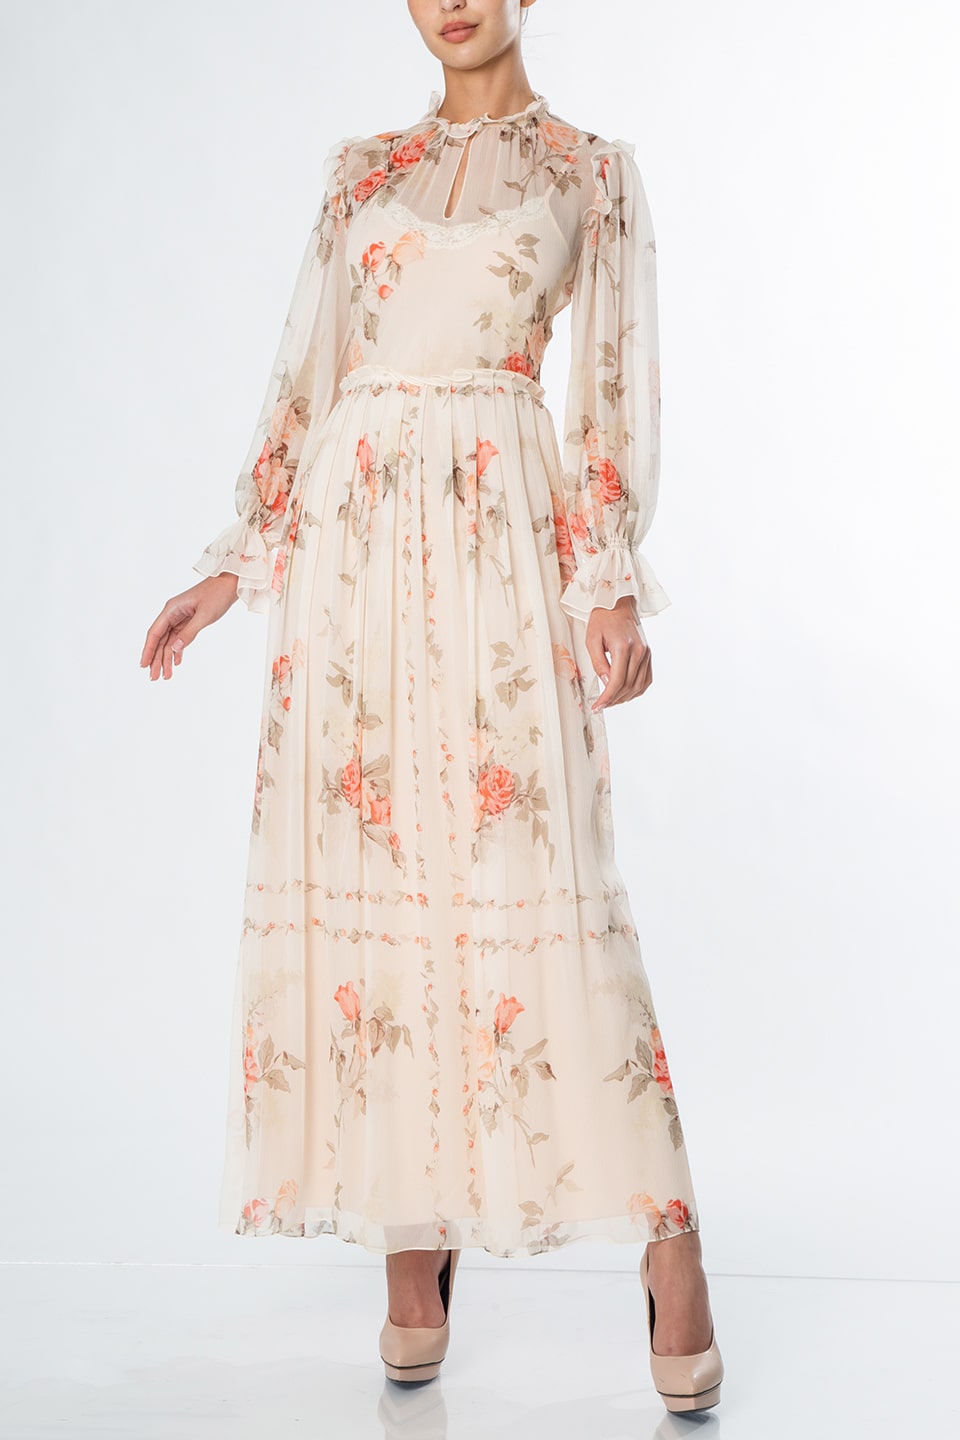 Thumbnail for Product gallery 1, Midi dress from fashion designer in peach pink color with floral print